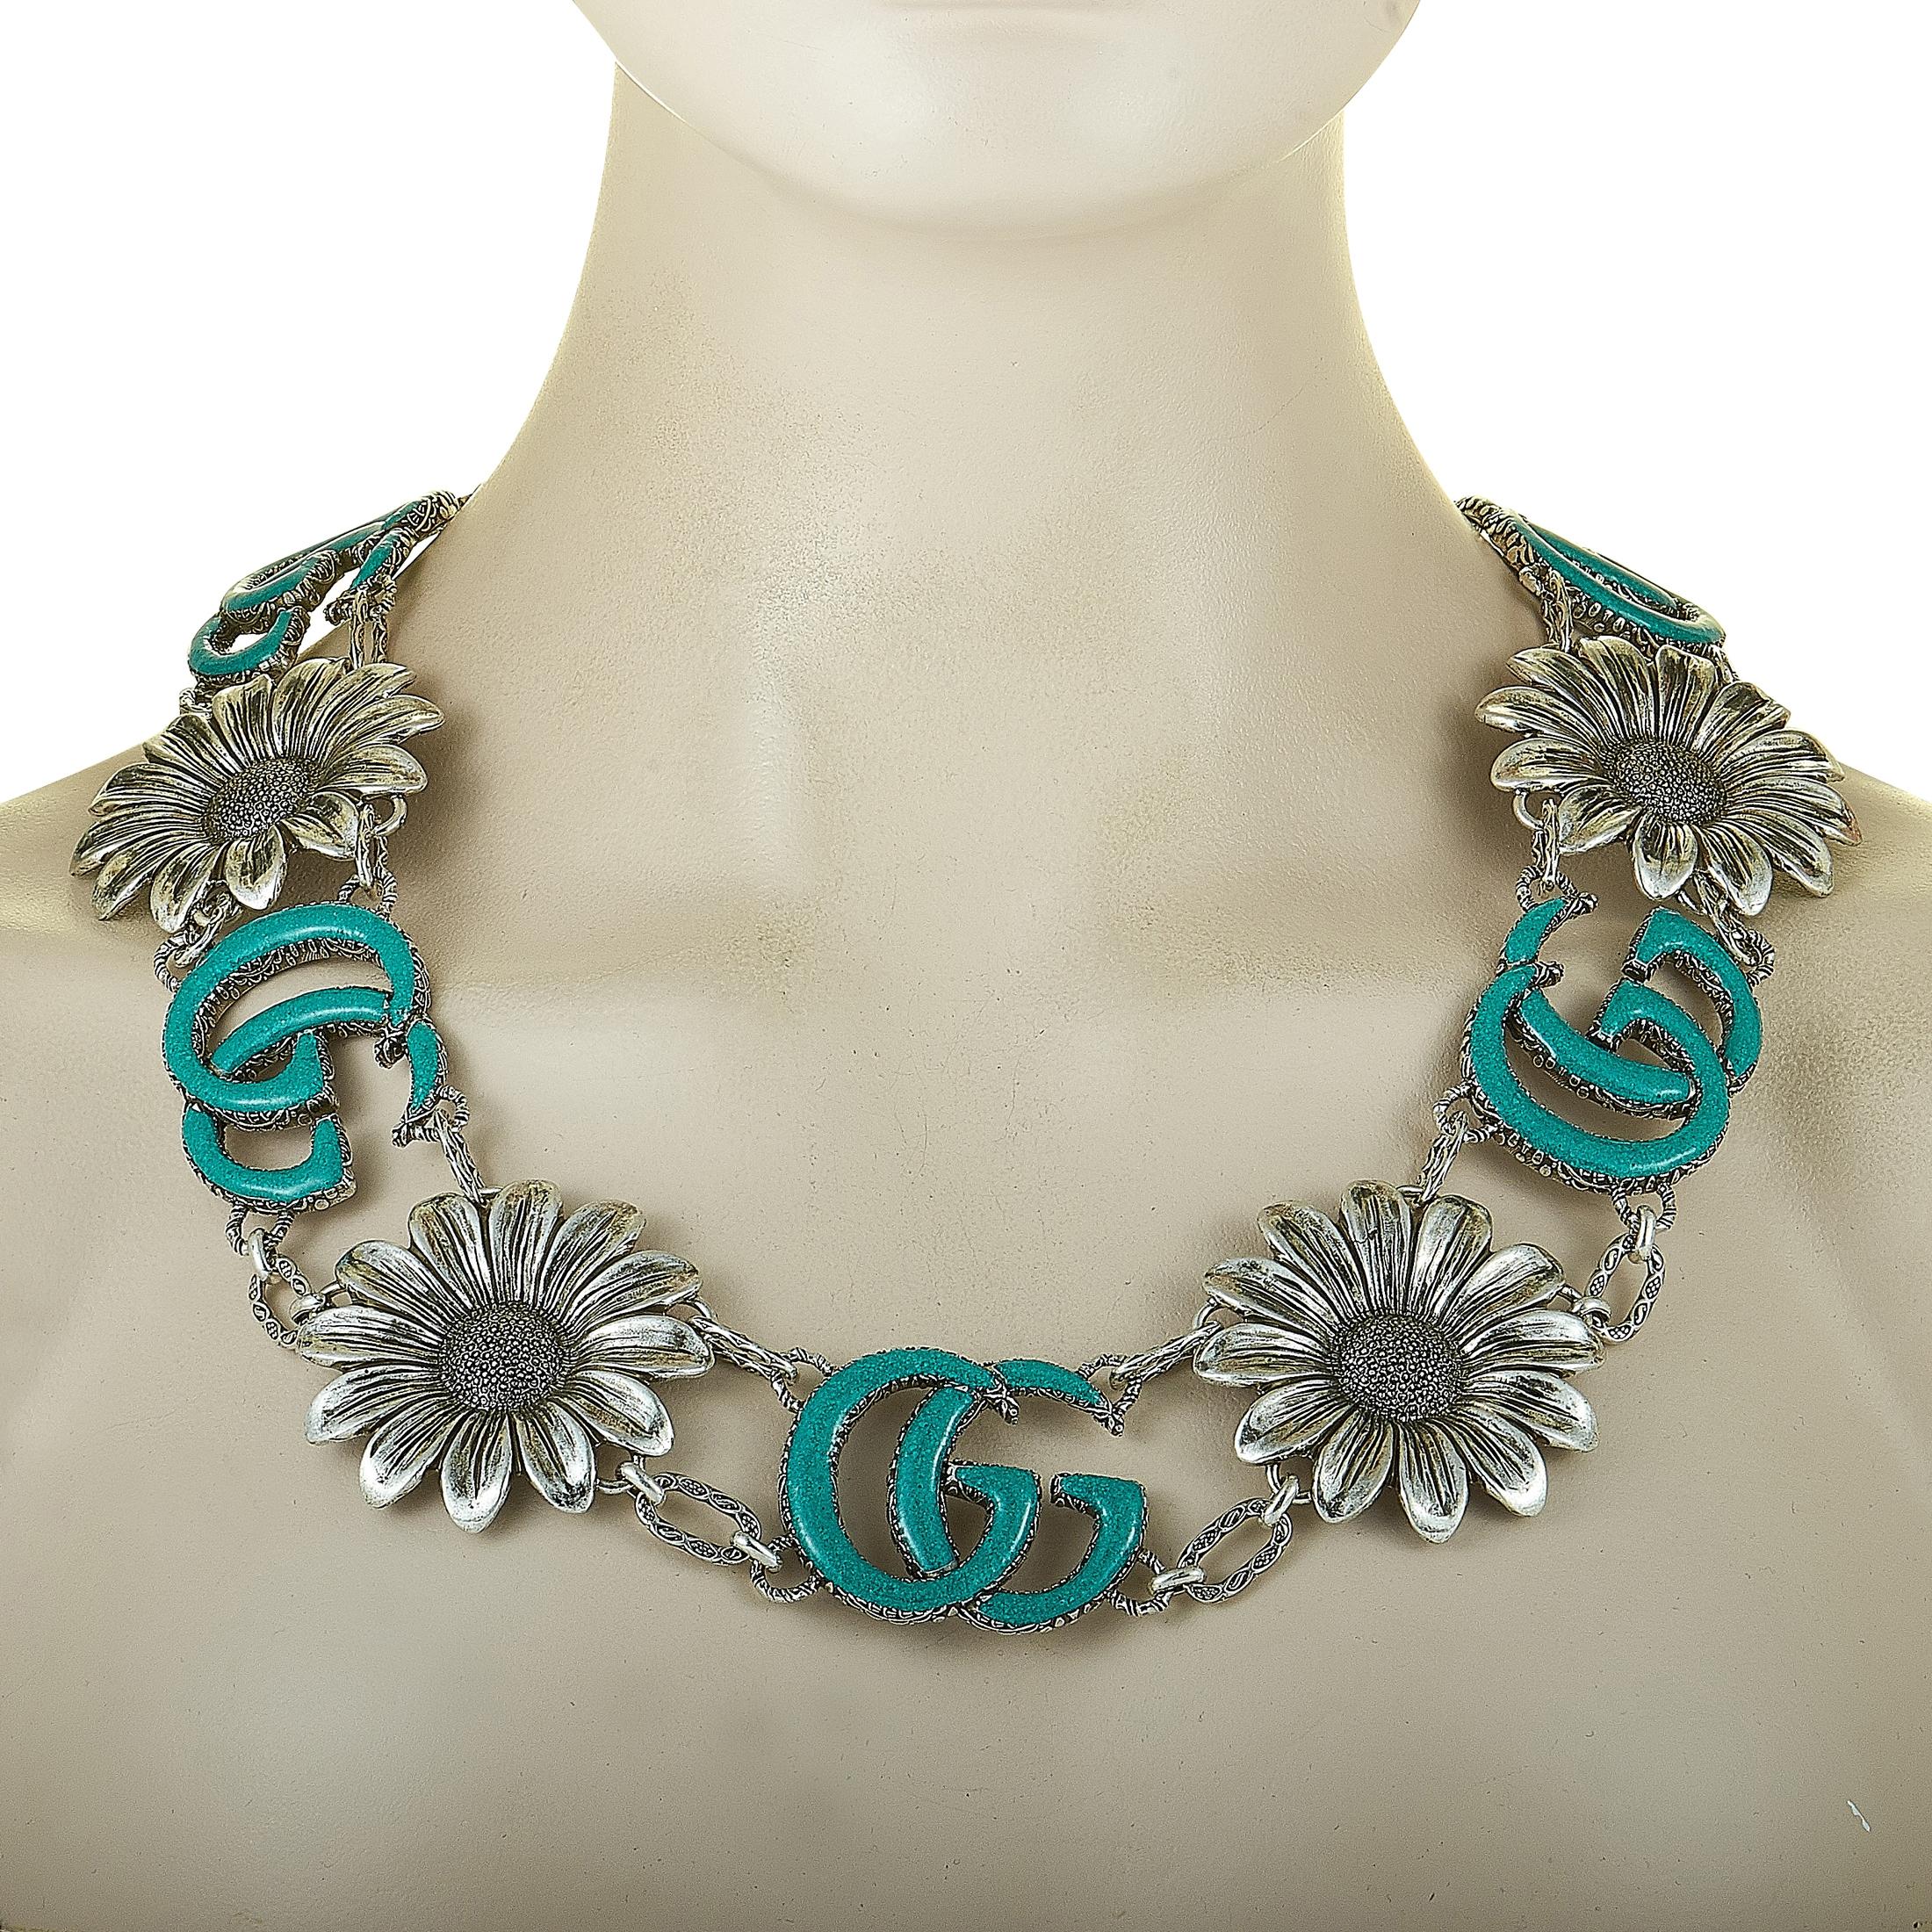 The Gucci “GG Marmont” necklace is made out of aged sterling silver and turquoise resin and weighs 305 grams, measuring 24” in length.
 
 This jewelry piece is offered in brand new condition.
